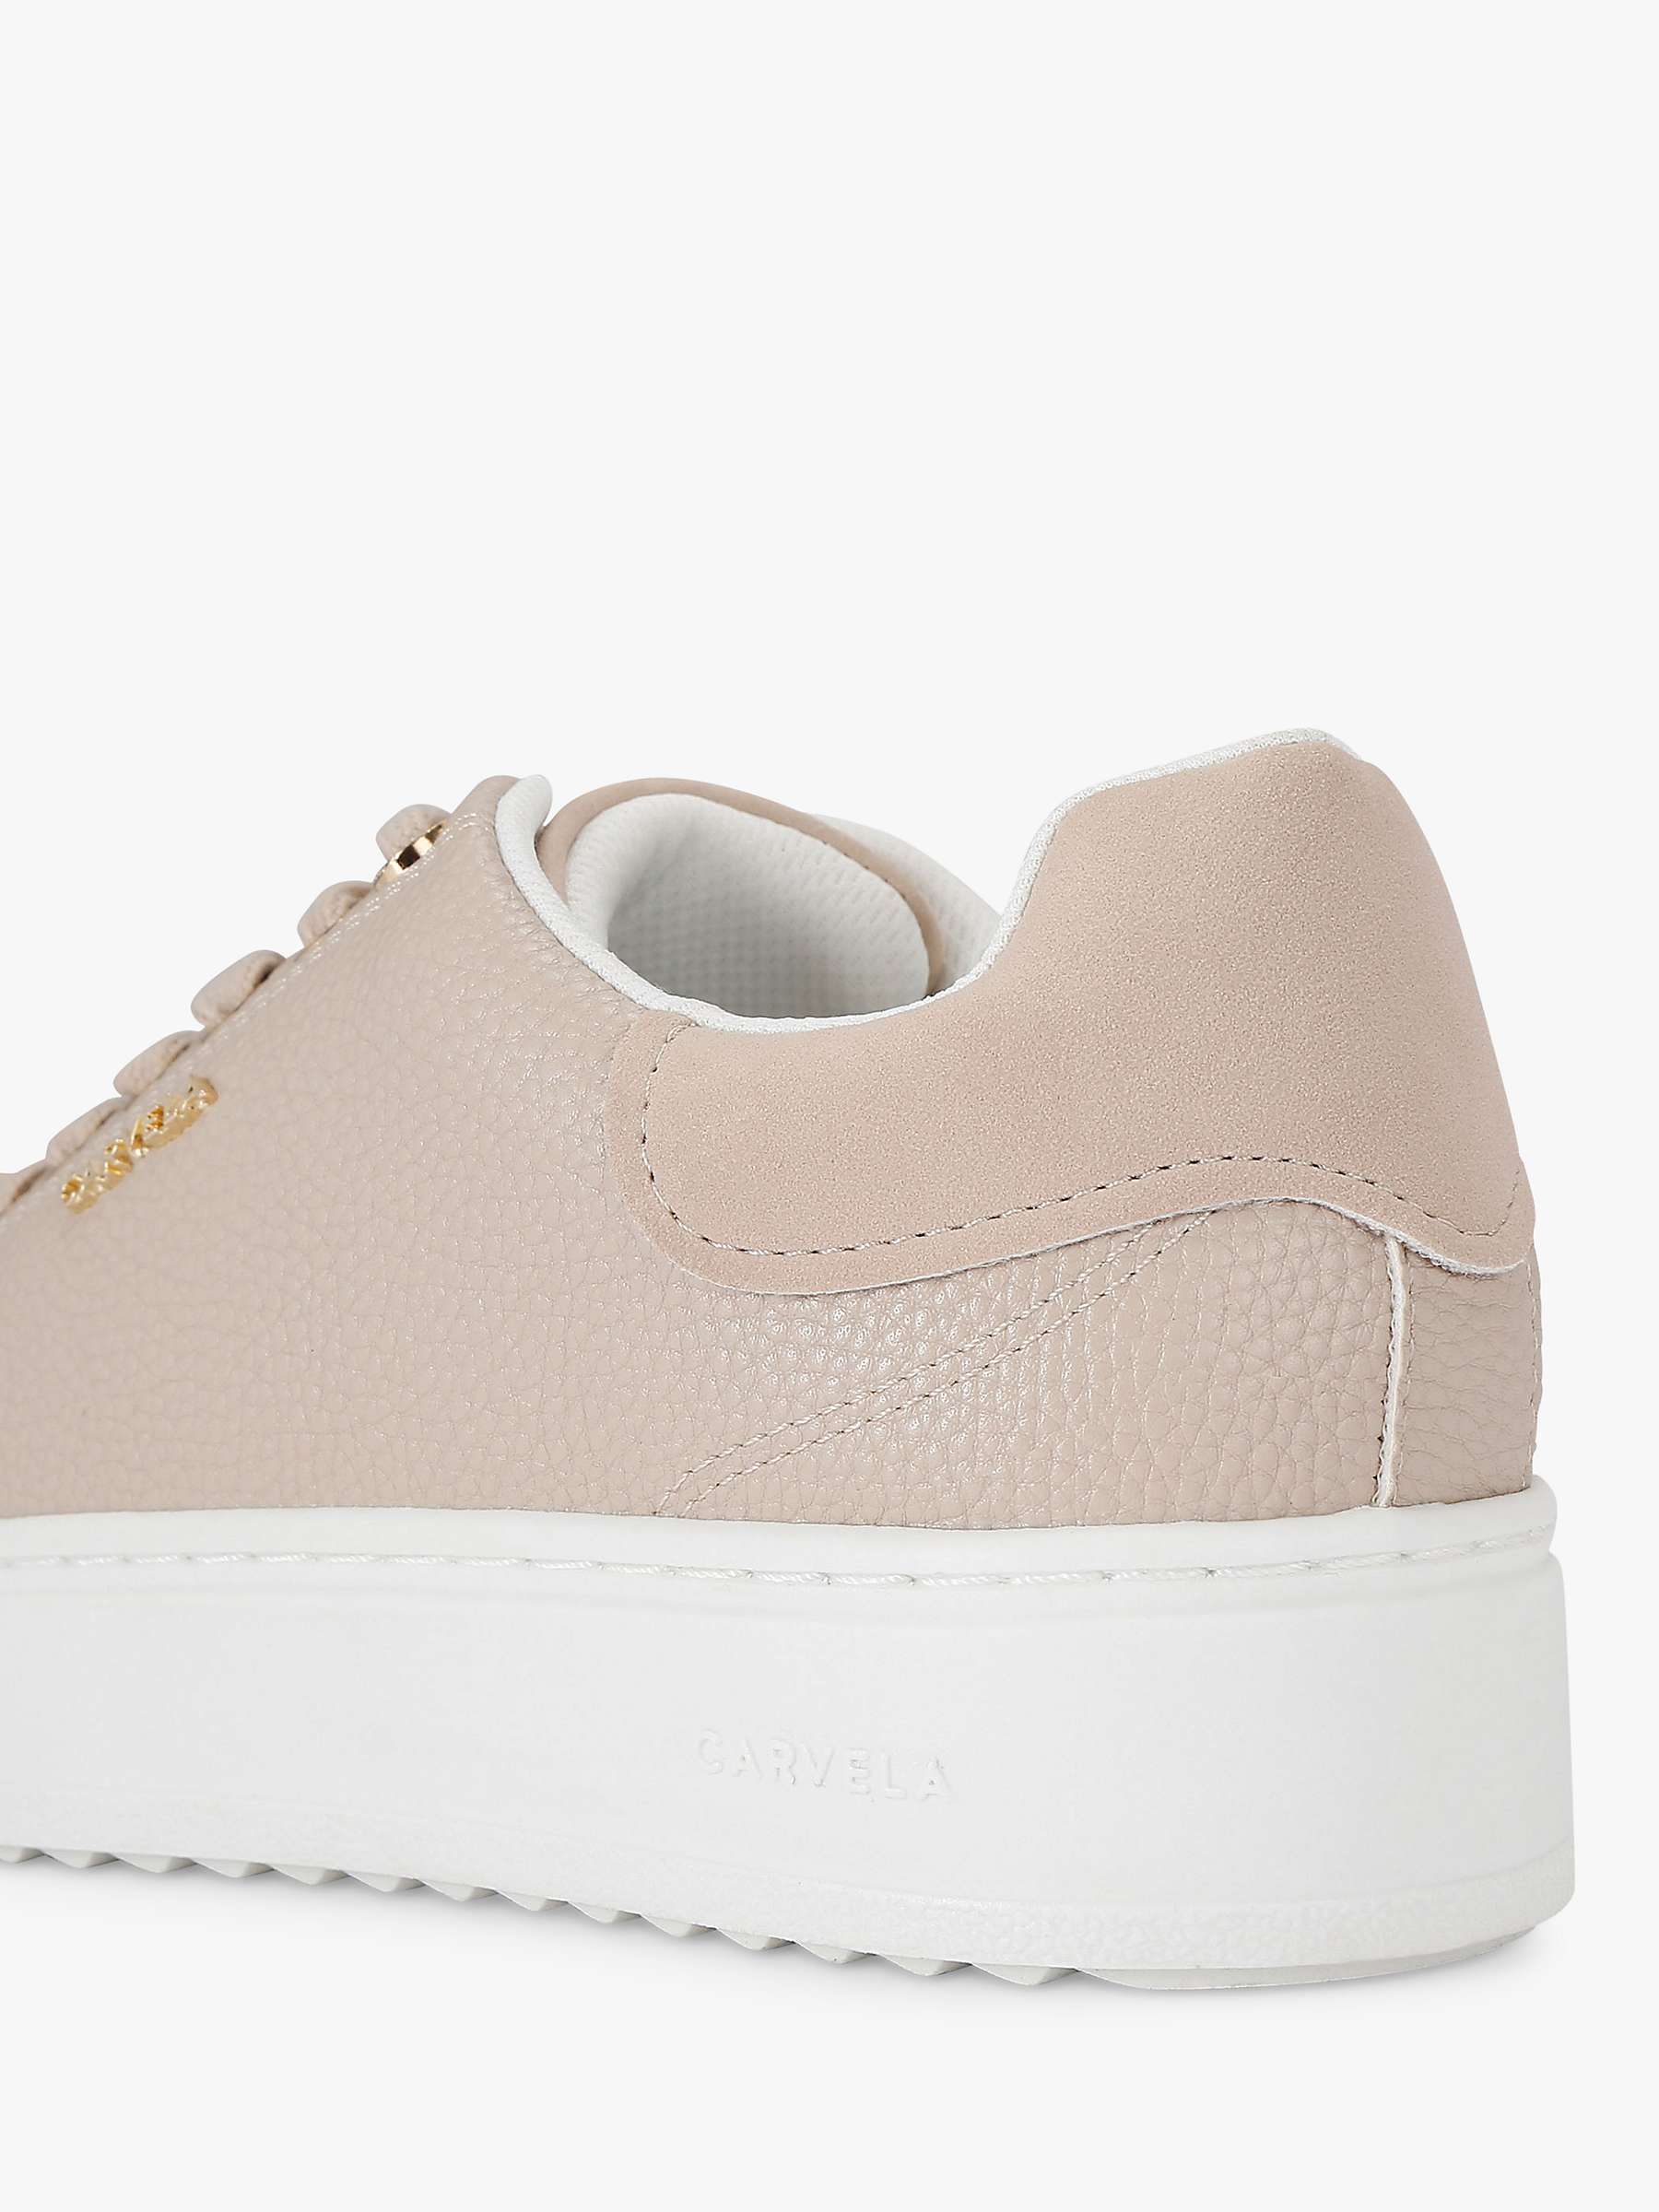 Buy Carvela Dream 2 Trainers, Taupe Online at johnlewis.com